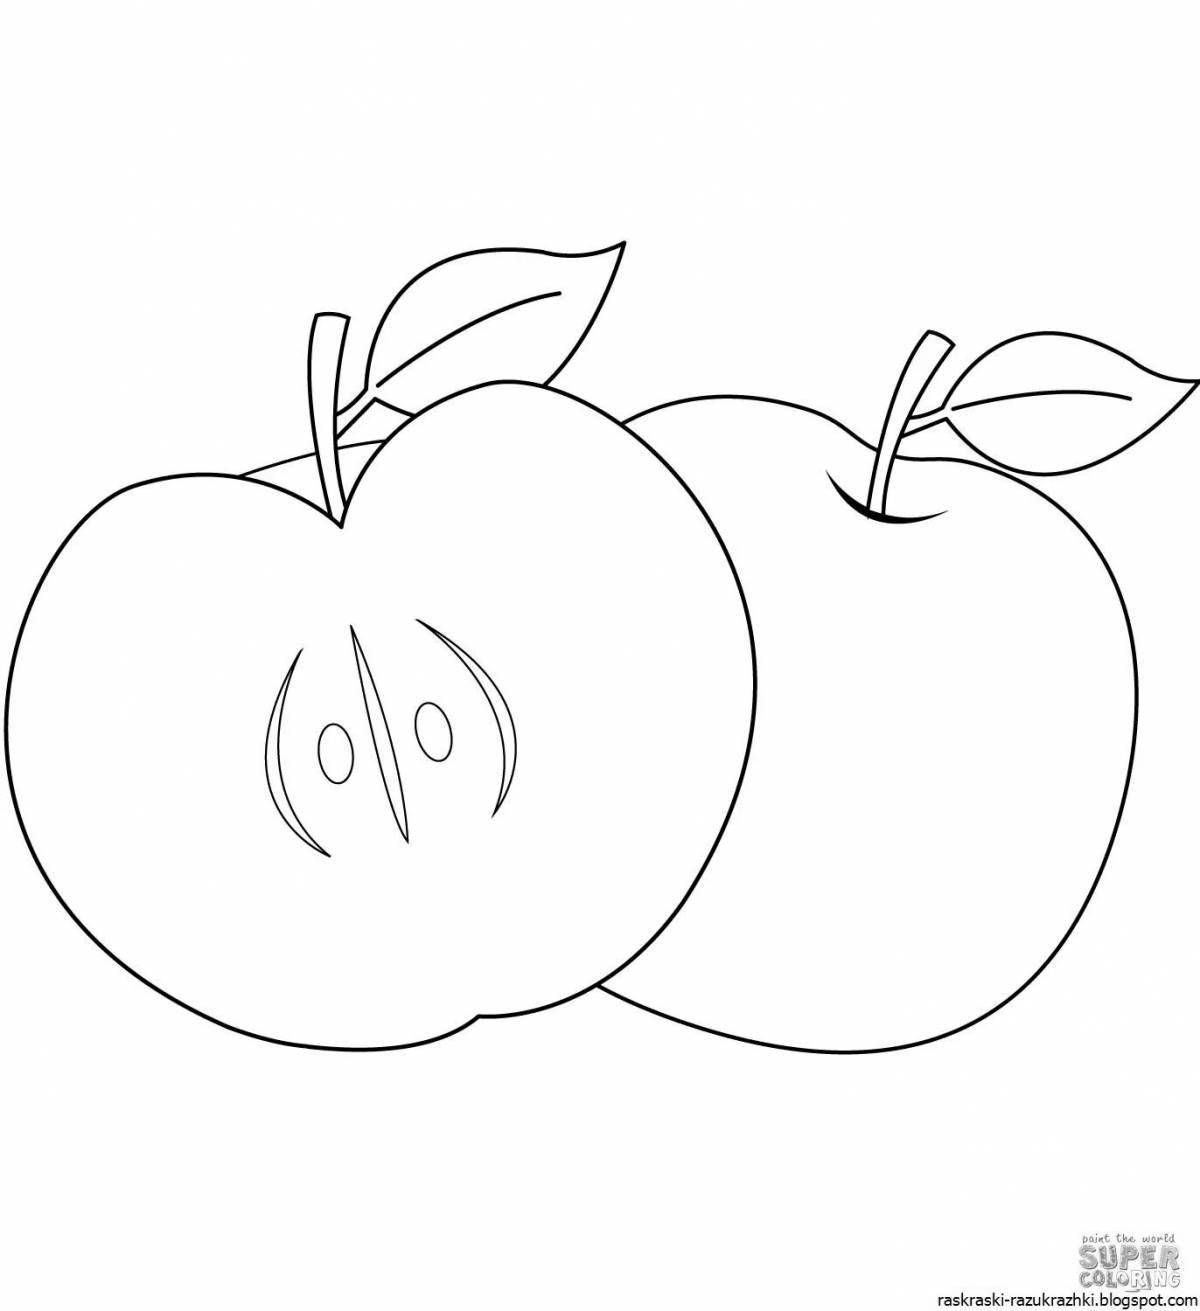 Apple drawing for kids #3